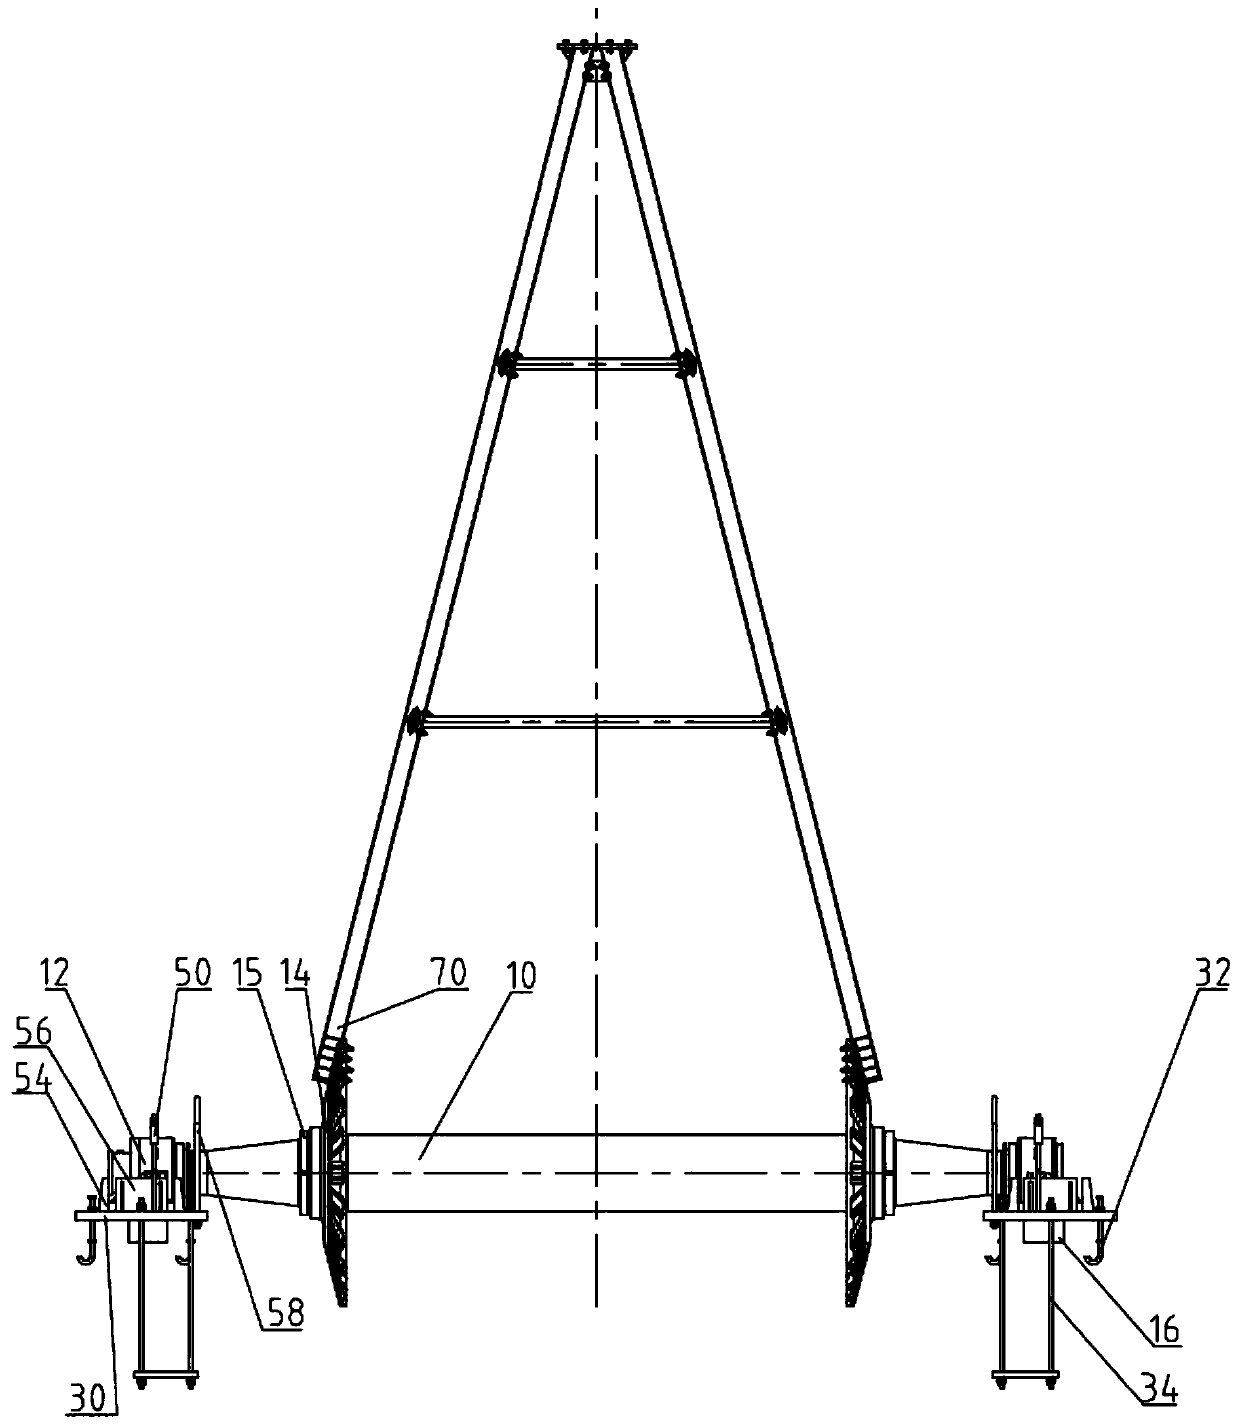 Drum-shaped filter screen support structure in nuclear power plant